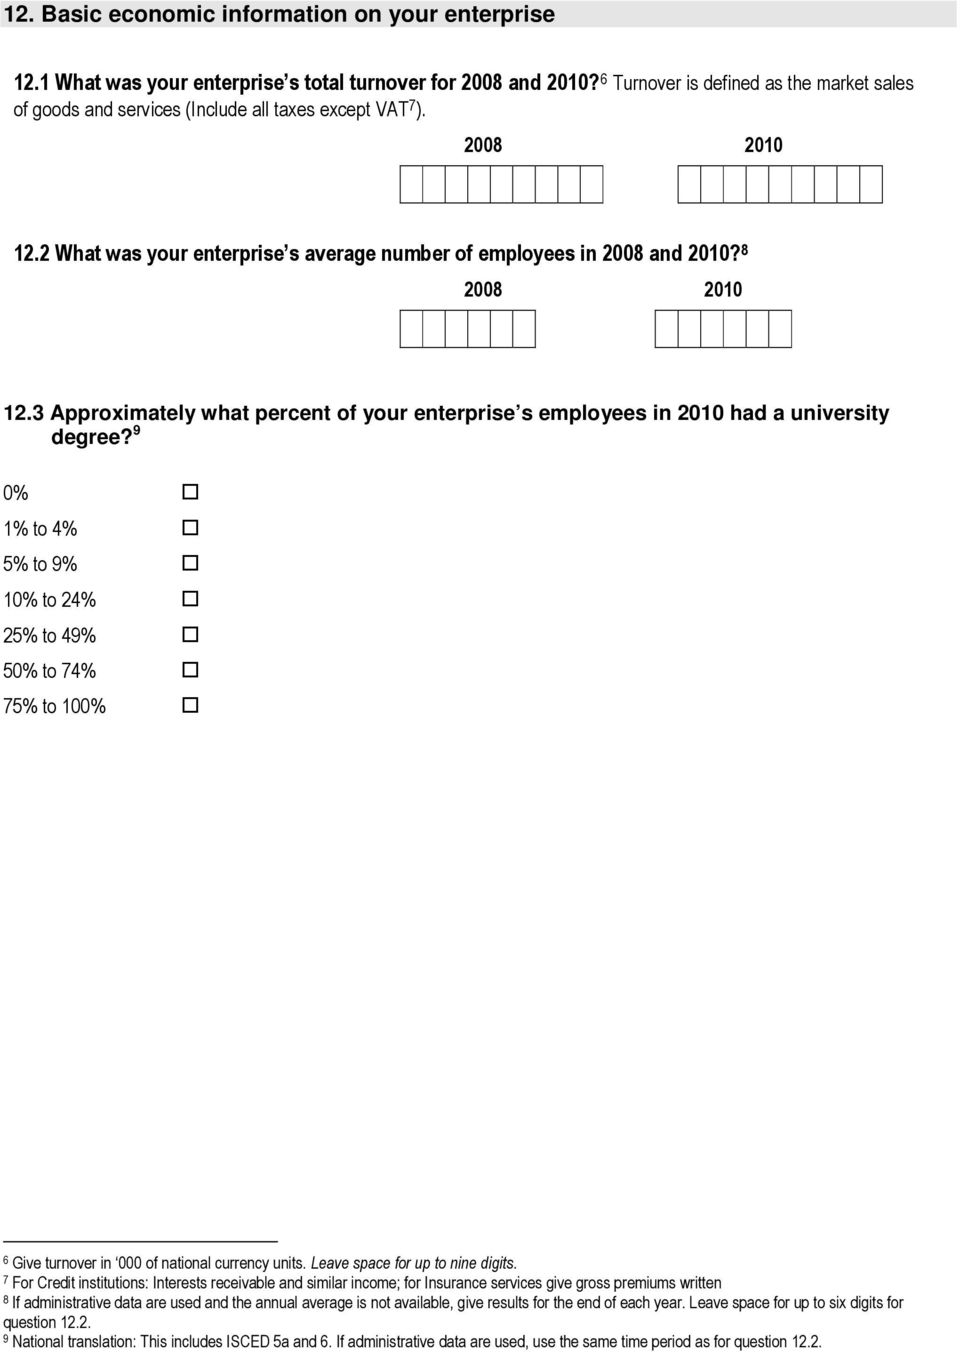 8 2008 2010 12.3 Approximately what percent of your enterprise s employees in 2010 had a university degree?